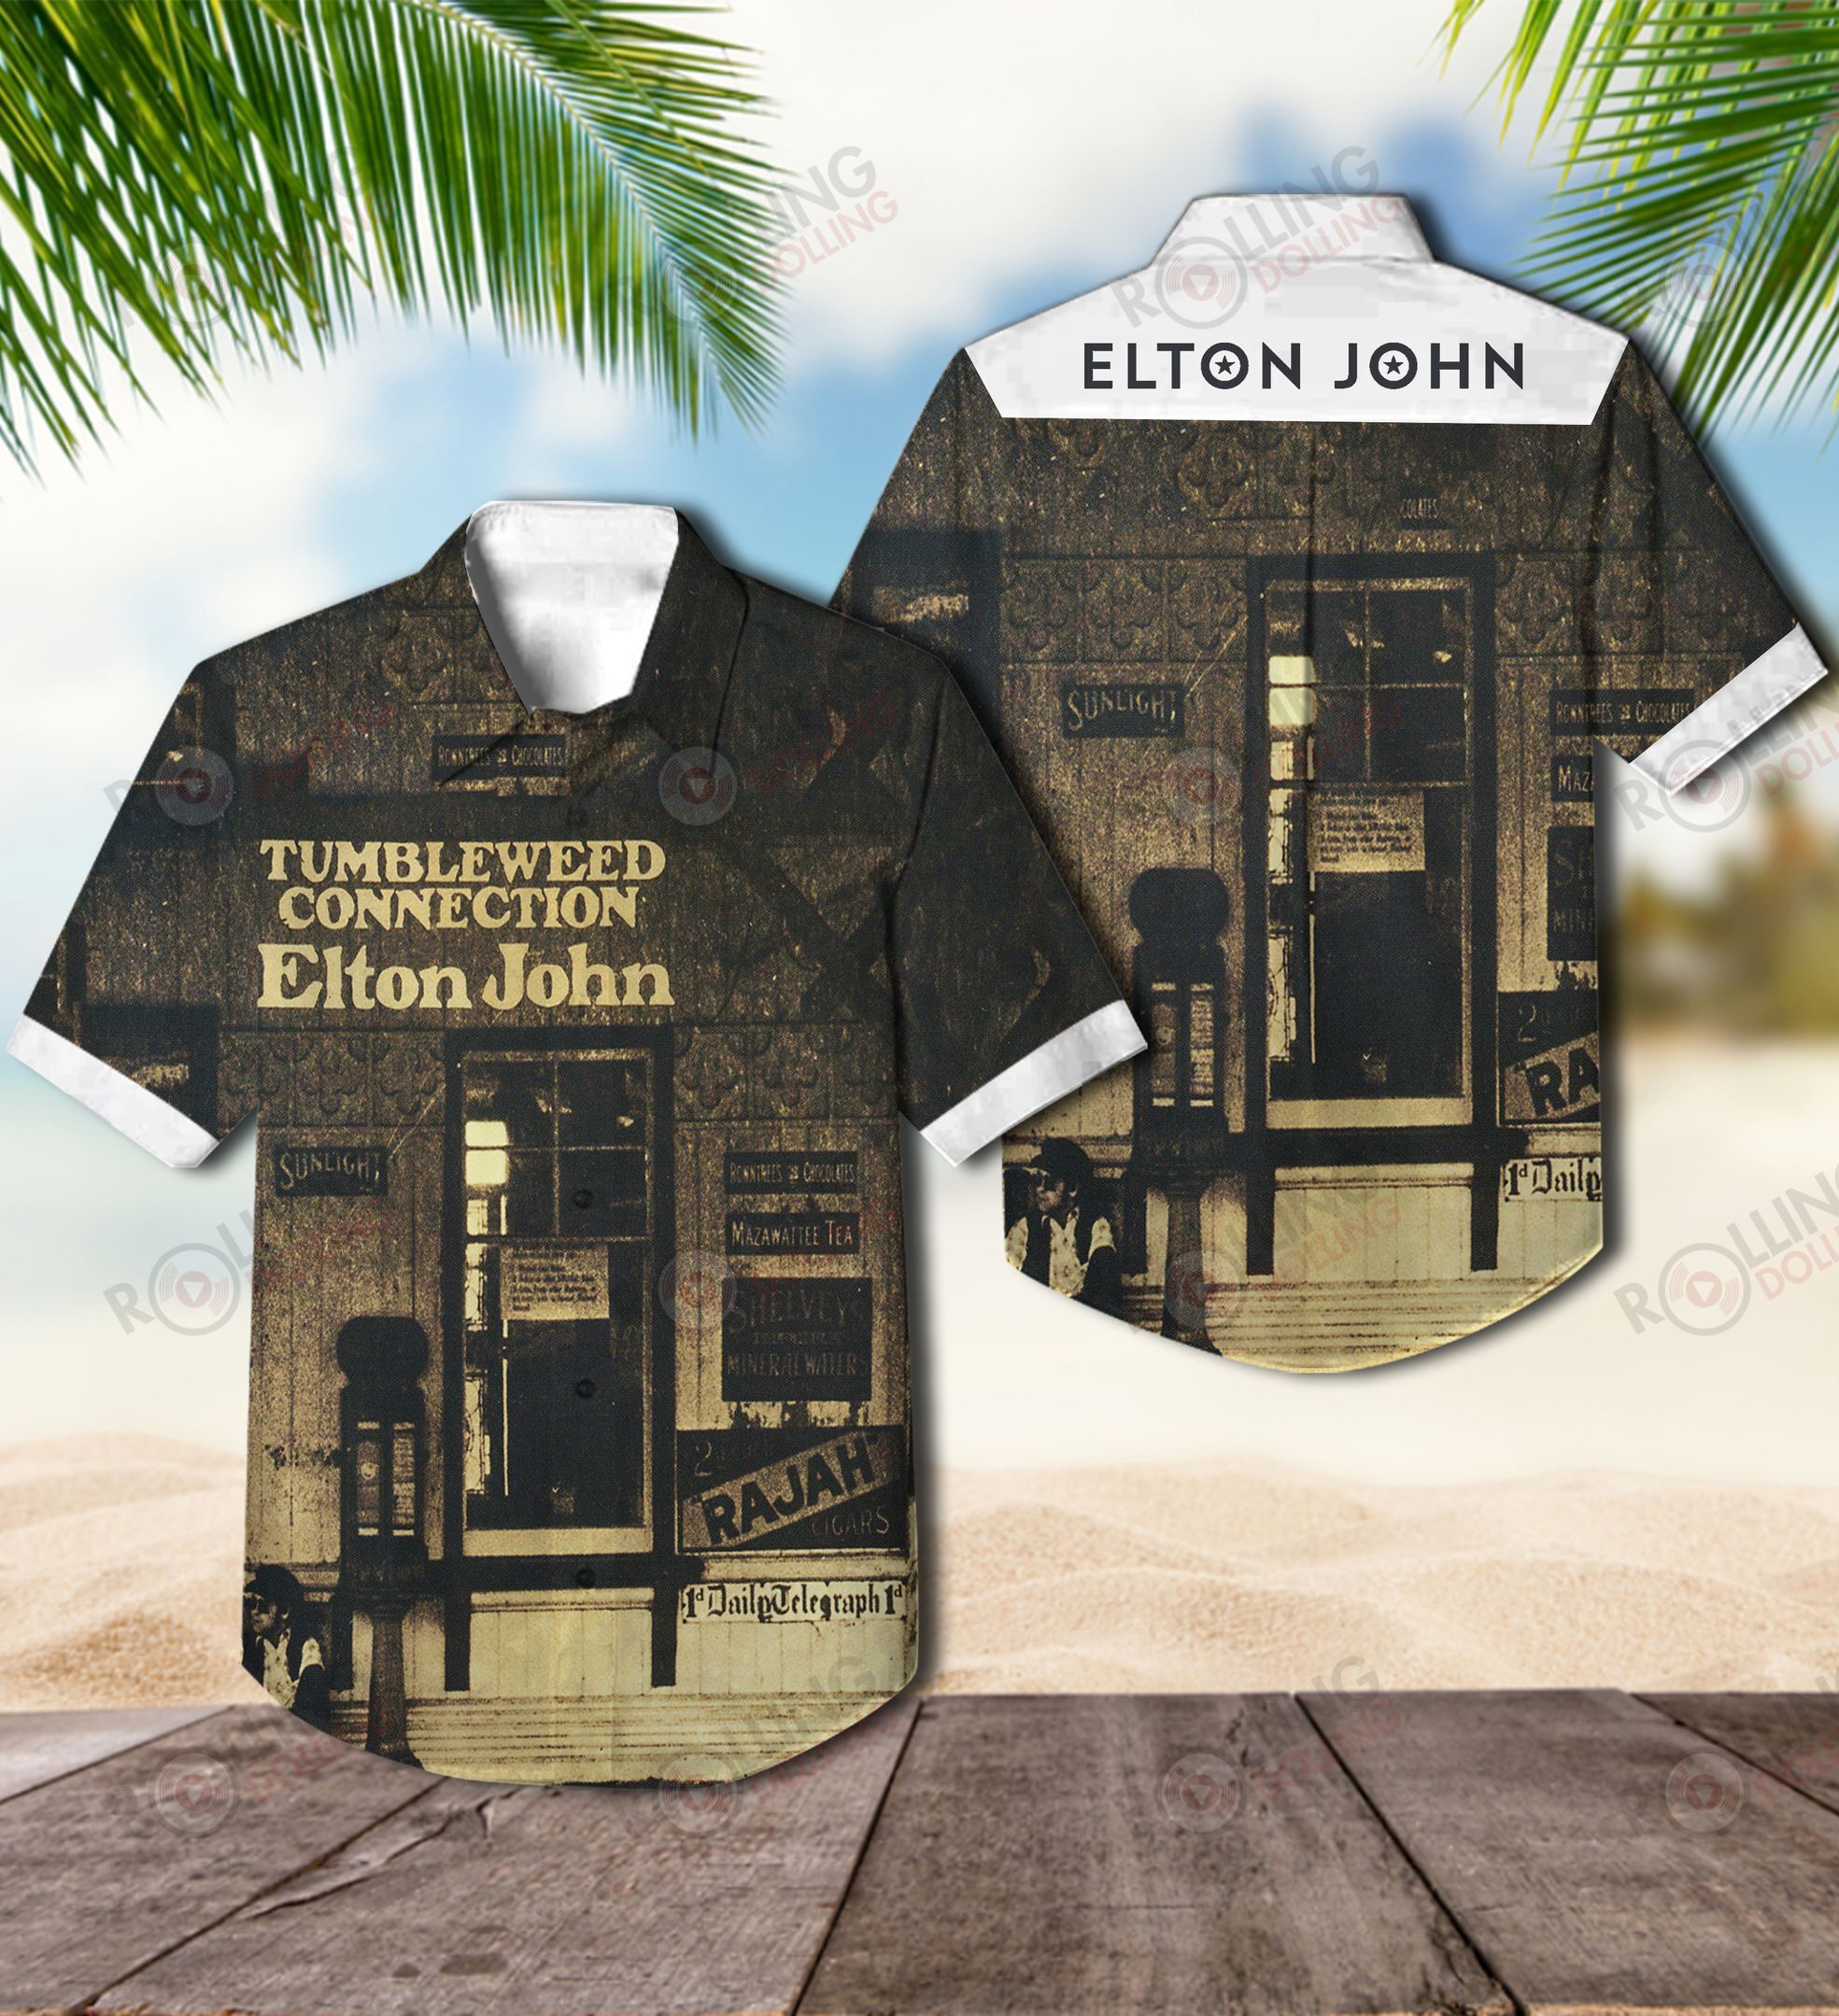 For summer, consider wearing This Amazing Hawaiian Shirt shirt in our store 51